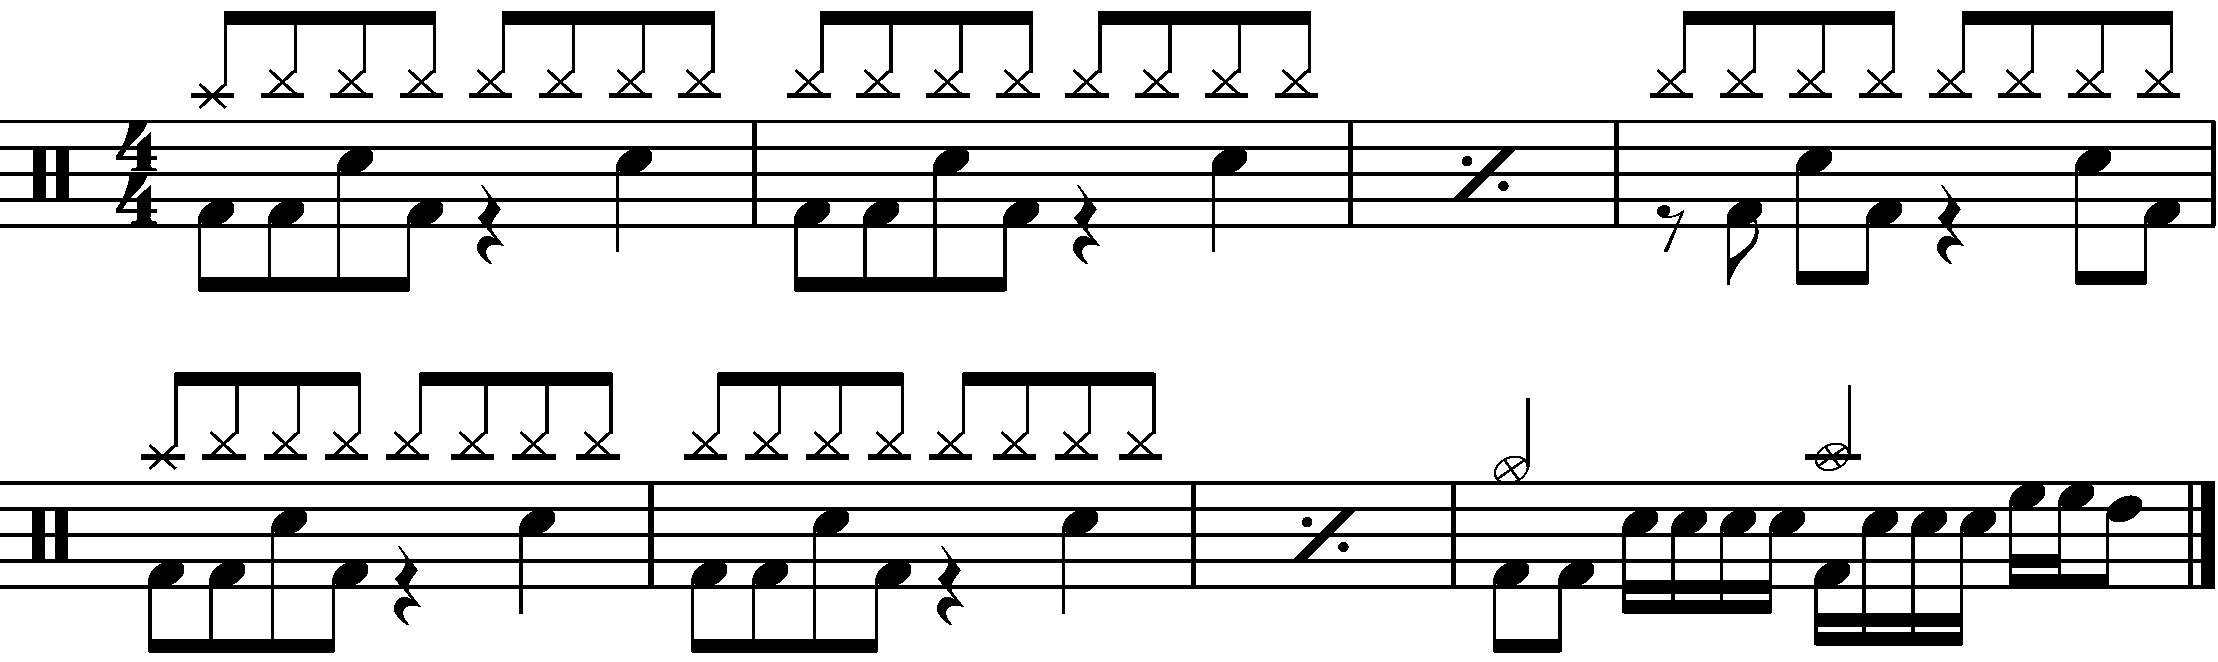 An eight bar pattern using groove based fills